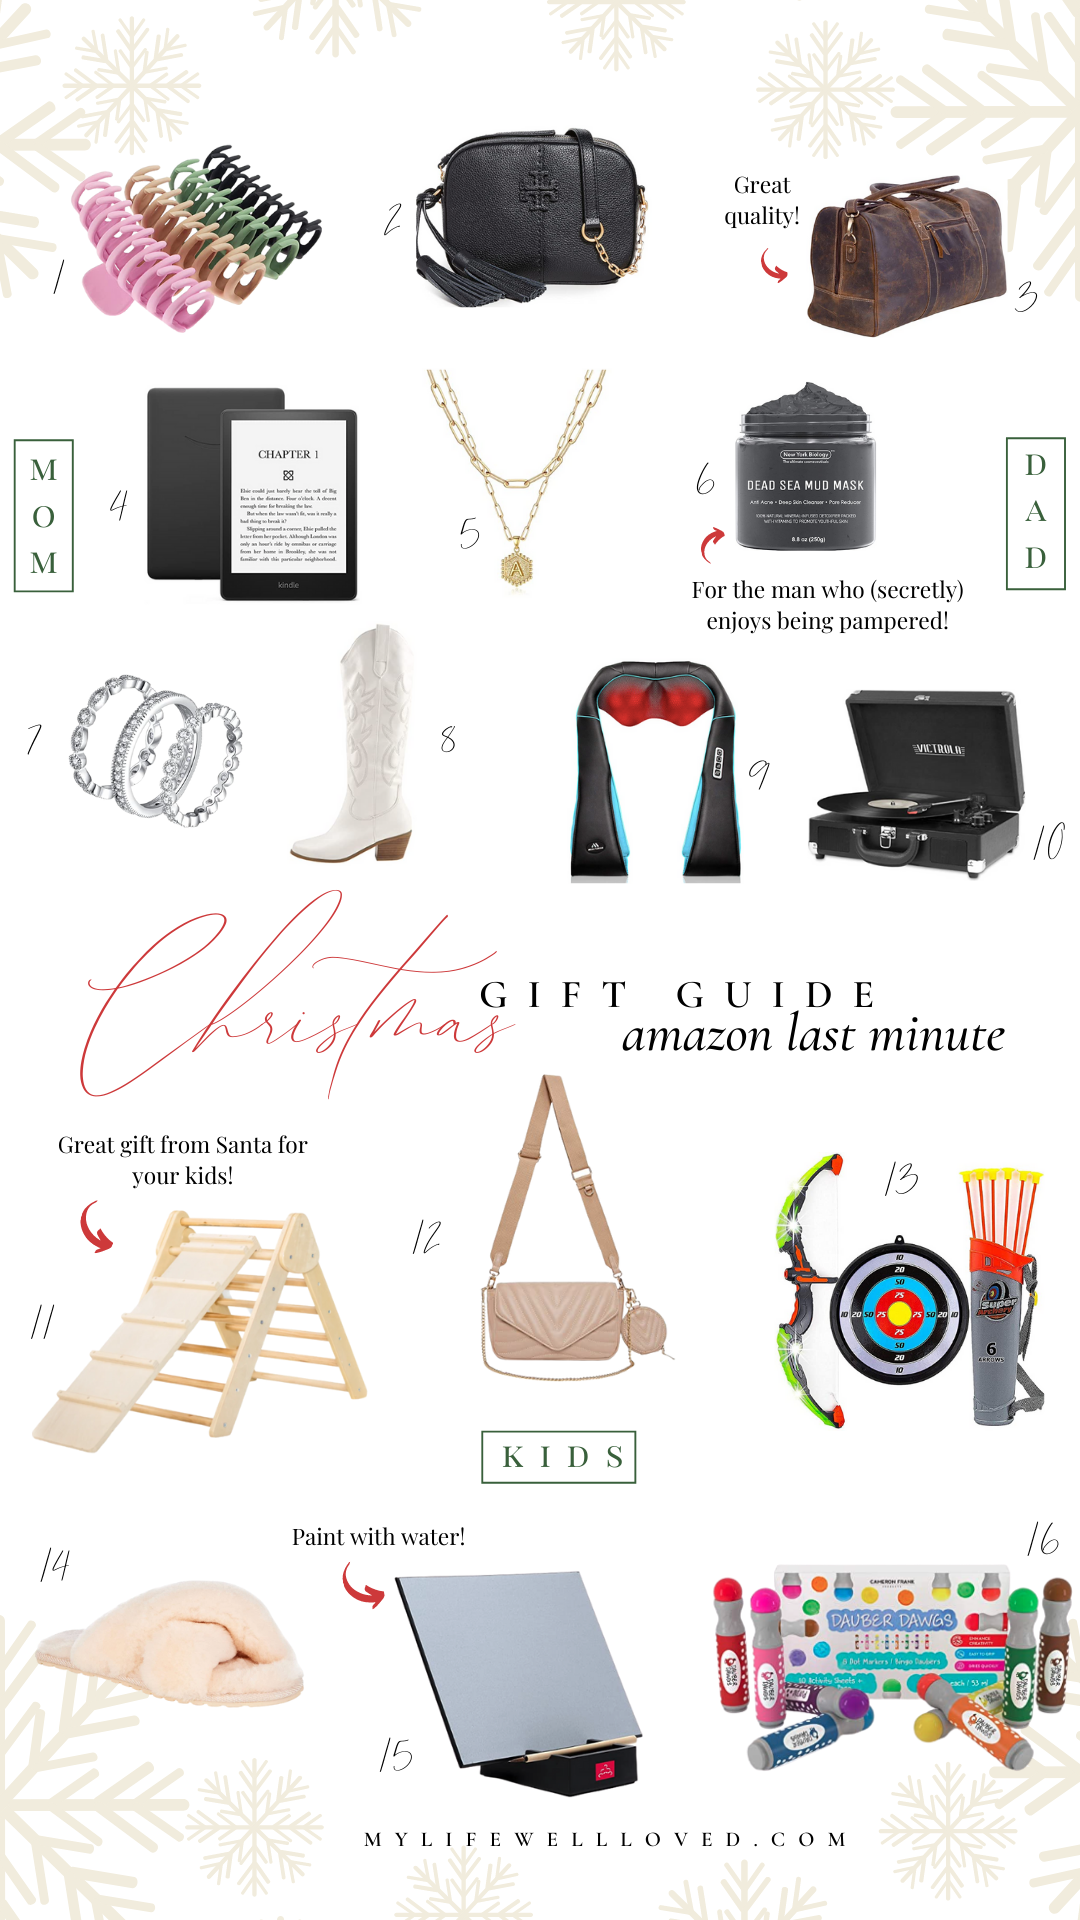 Last Minute Christmas Gifts Ideas From Amazon by Alabama family + lifestyle blogger, Heather Brown // My Life Well Loved